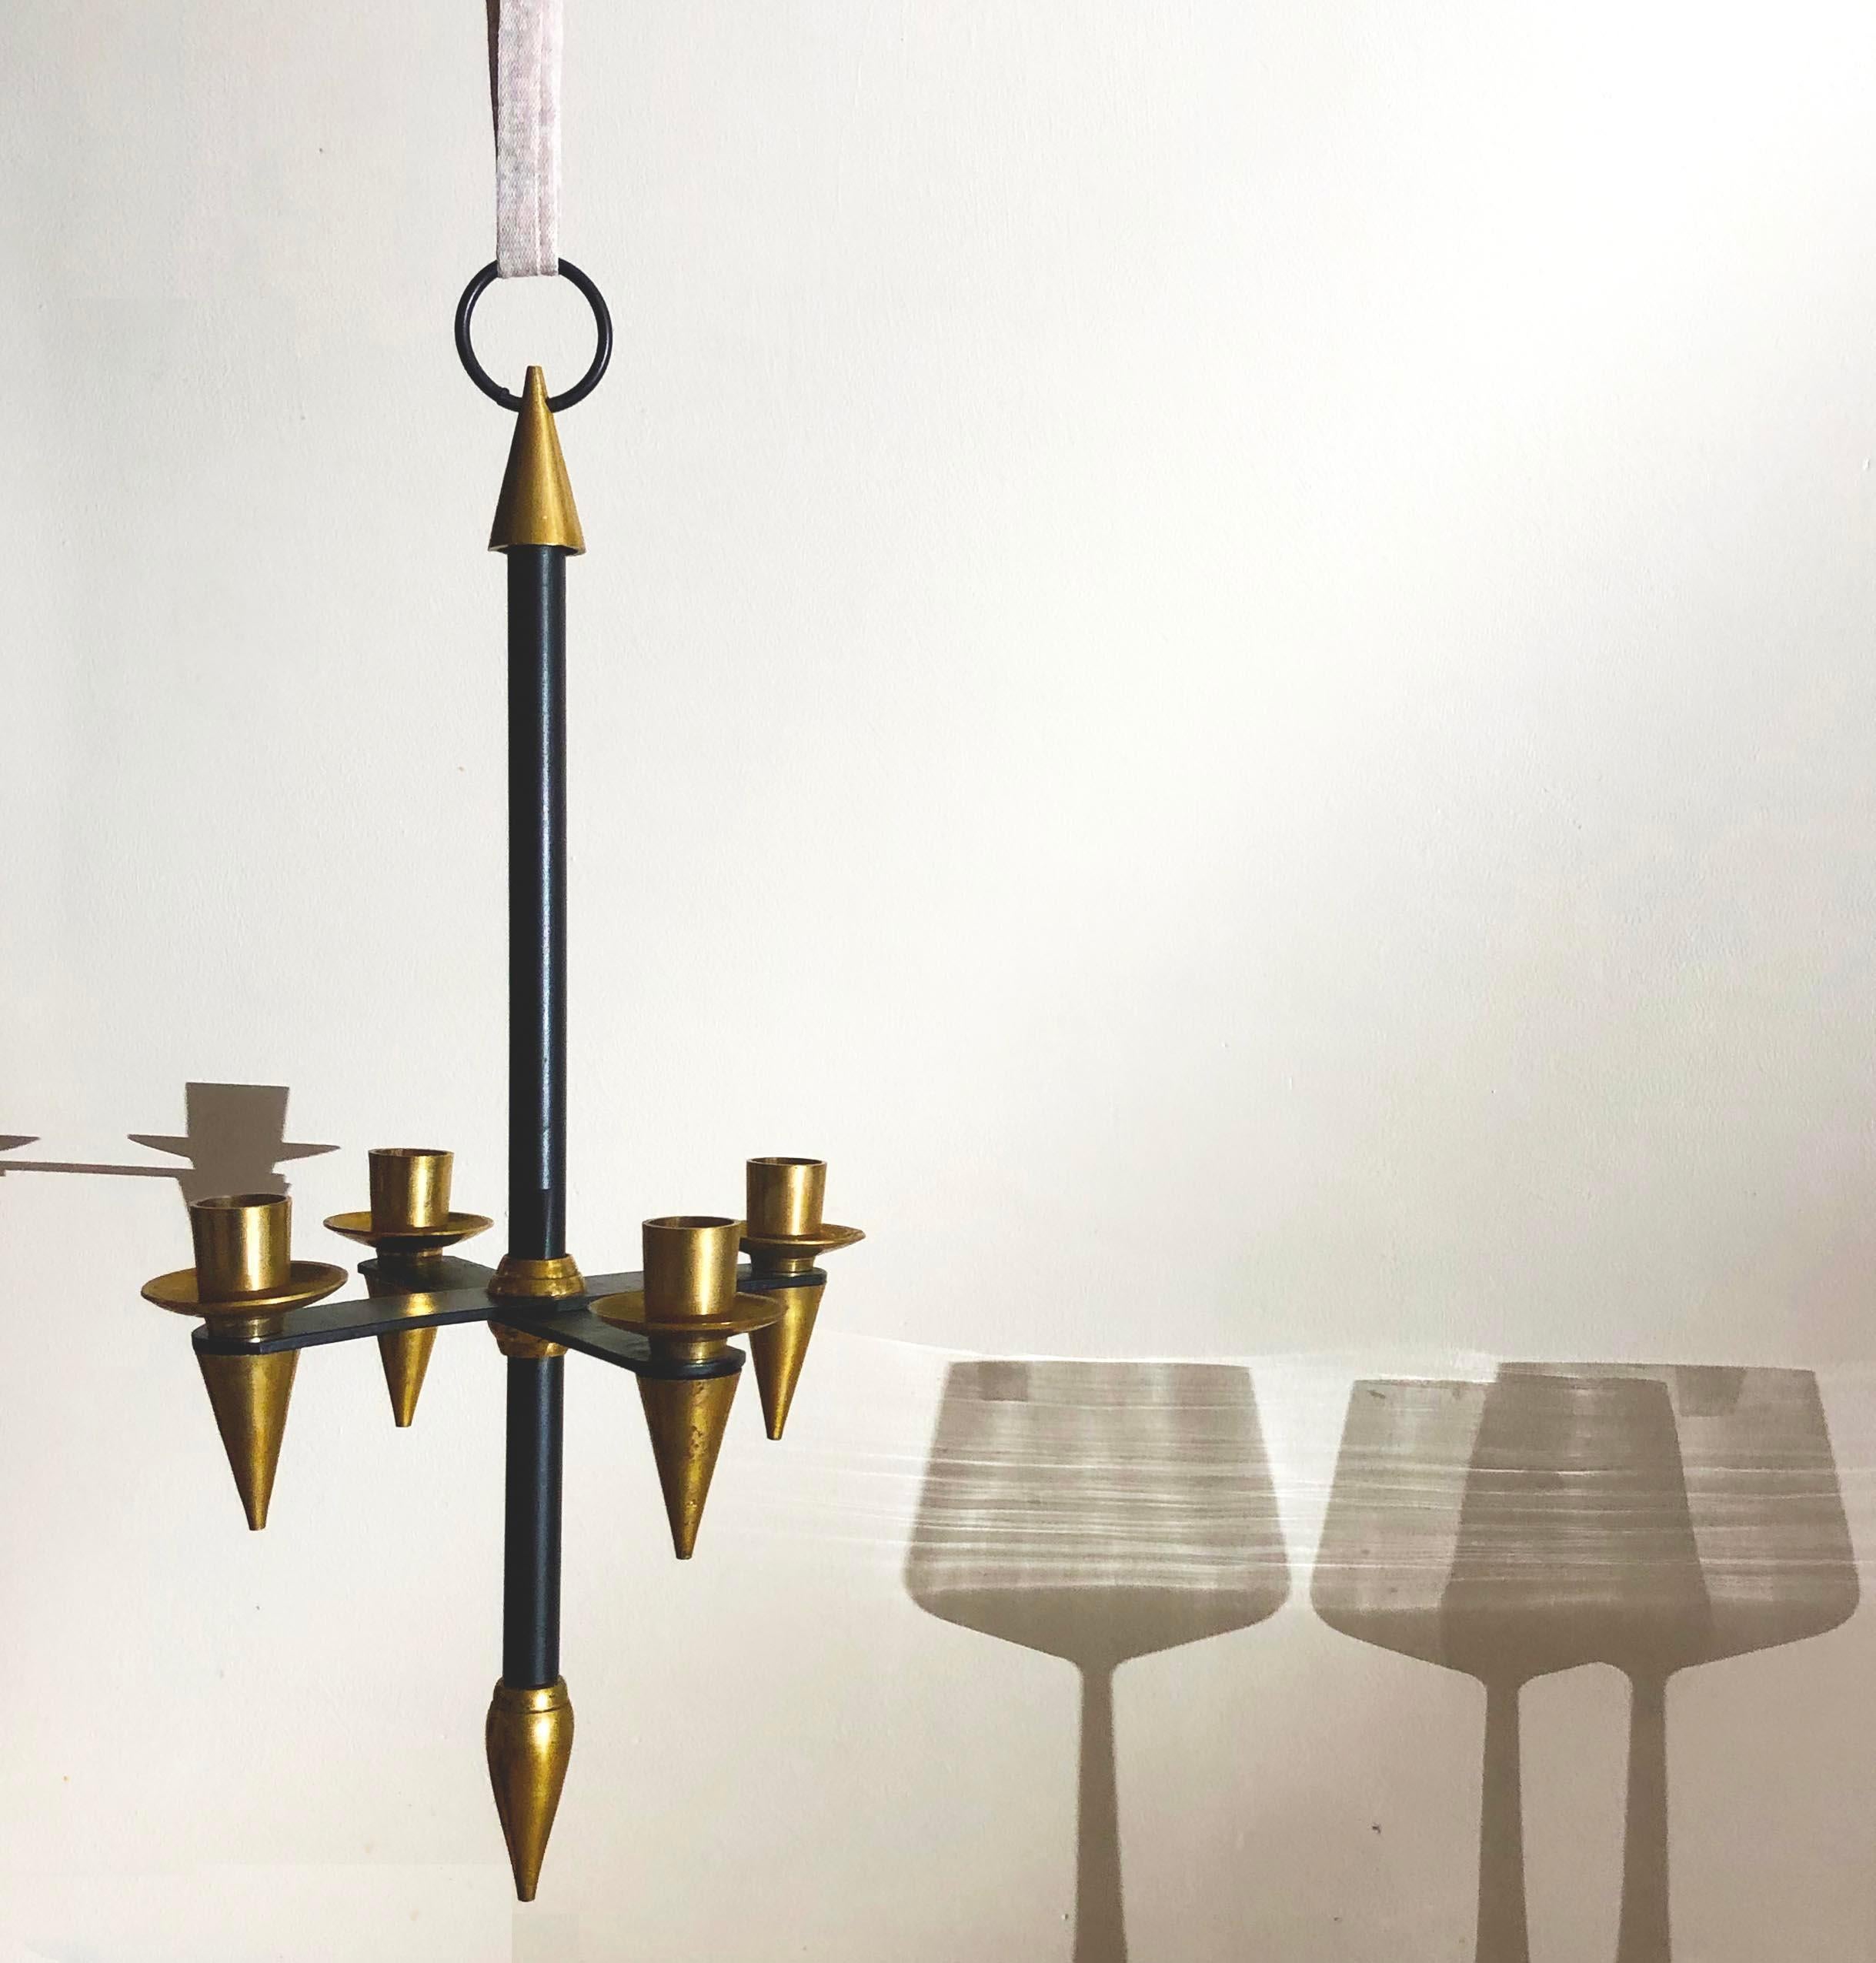 A stylish brass and enameled metal Italian hanging candlestick holder / candelabra, attributed to Italian designer Gio Ponti (1891-1979), circa.1955. 

It’s in great vintage condition with only superficial scratches. Can be hanged from the ceiling